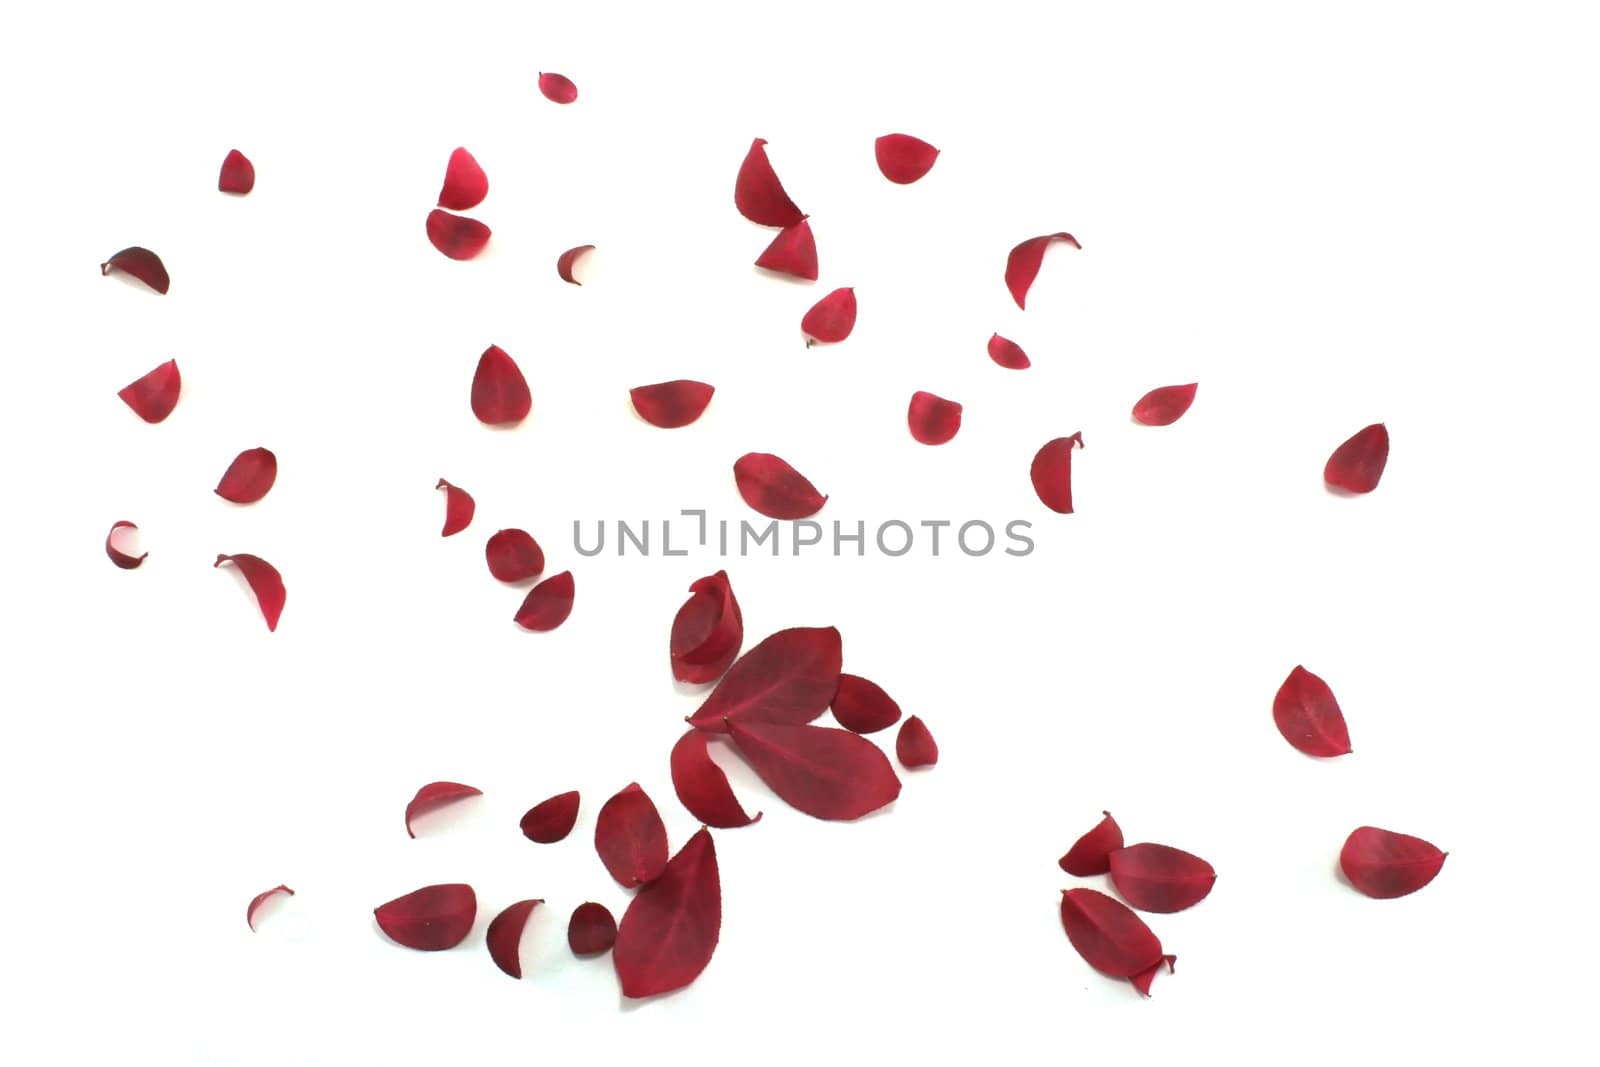 Red leaves scattered across a white background.